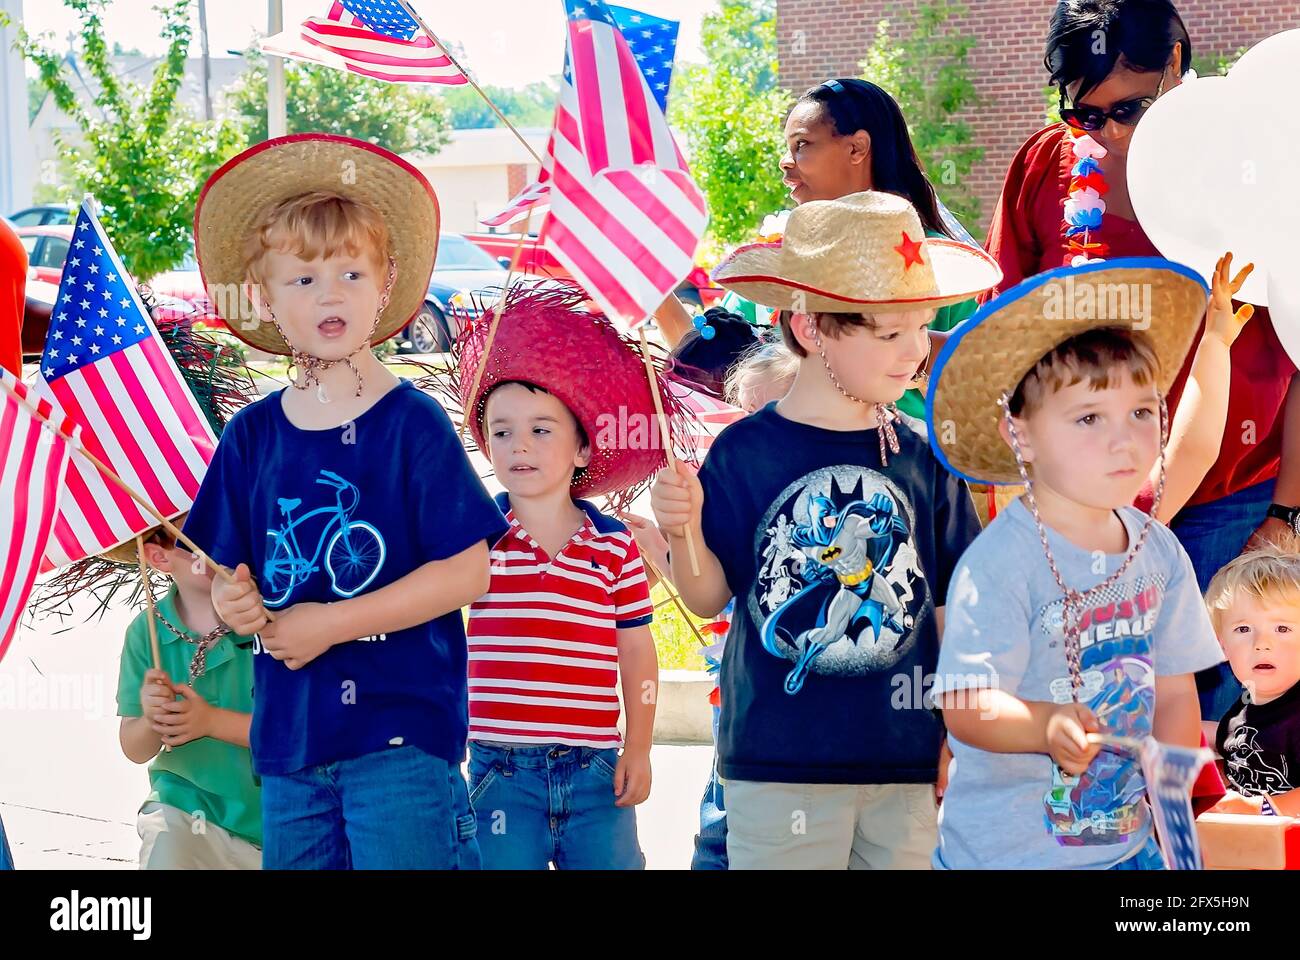 Children wave American flags during a Fourth of July parade, June 30, 2011, in Columbus, Mississippi. Stock Photo